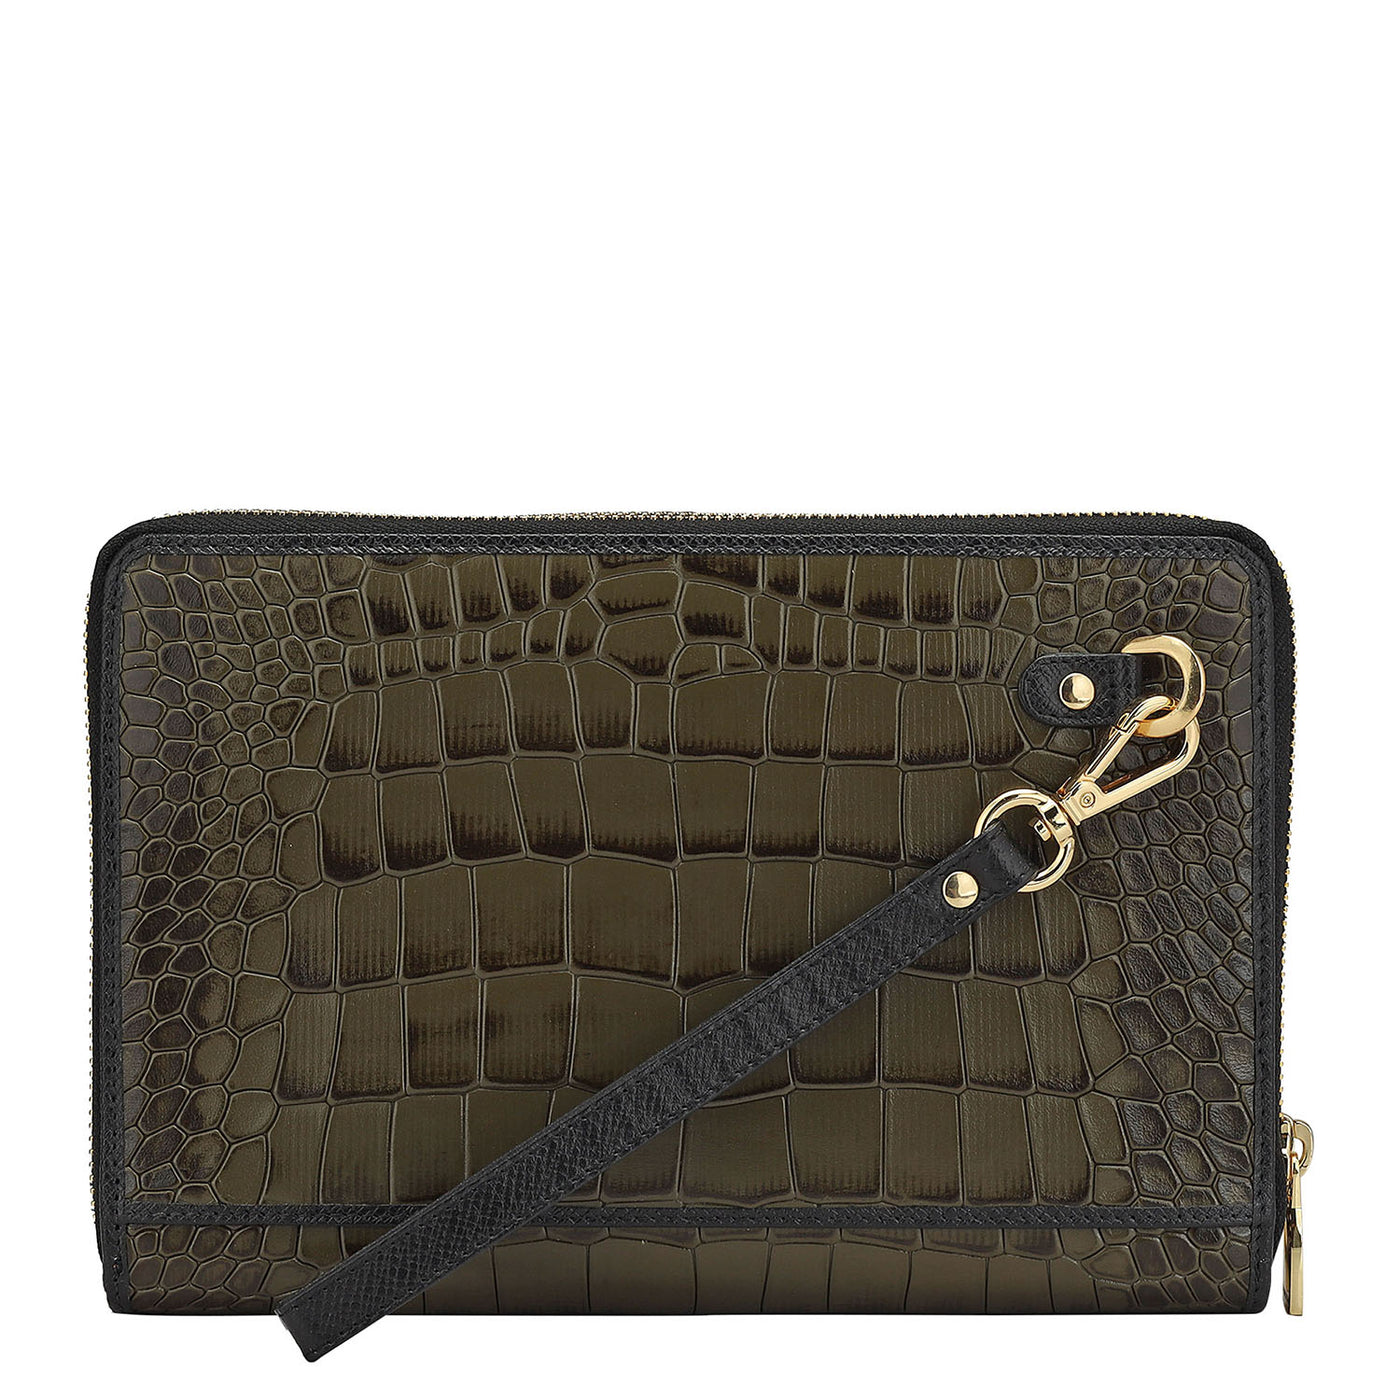 Croco Leather Multi Pouch - Military Green